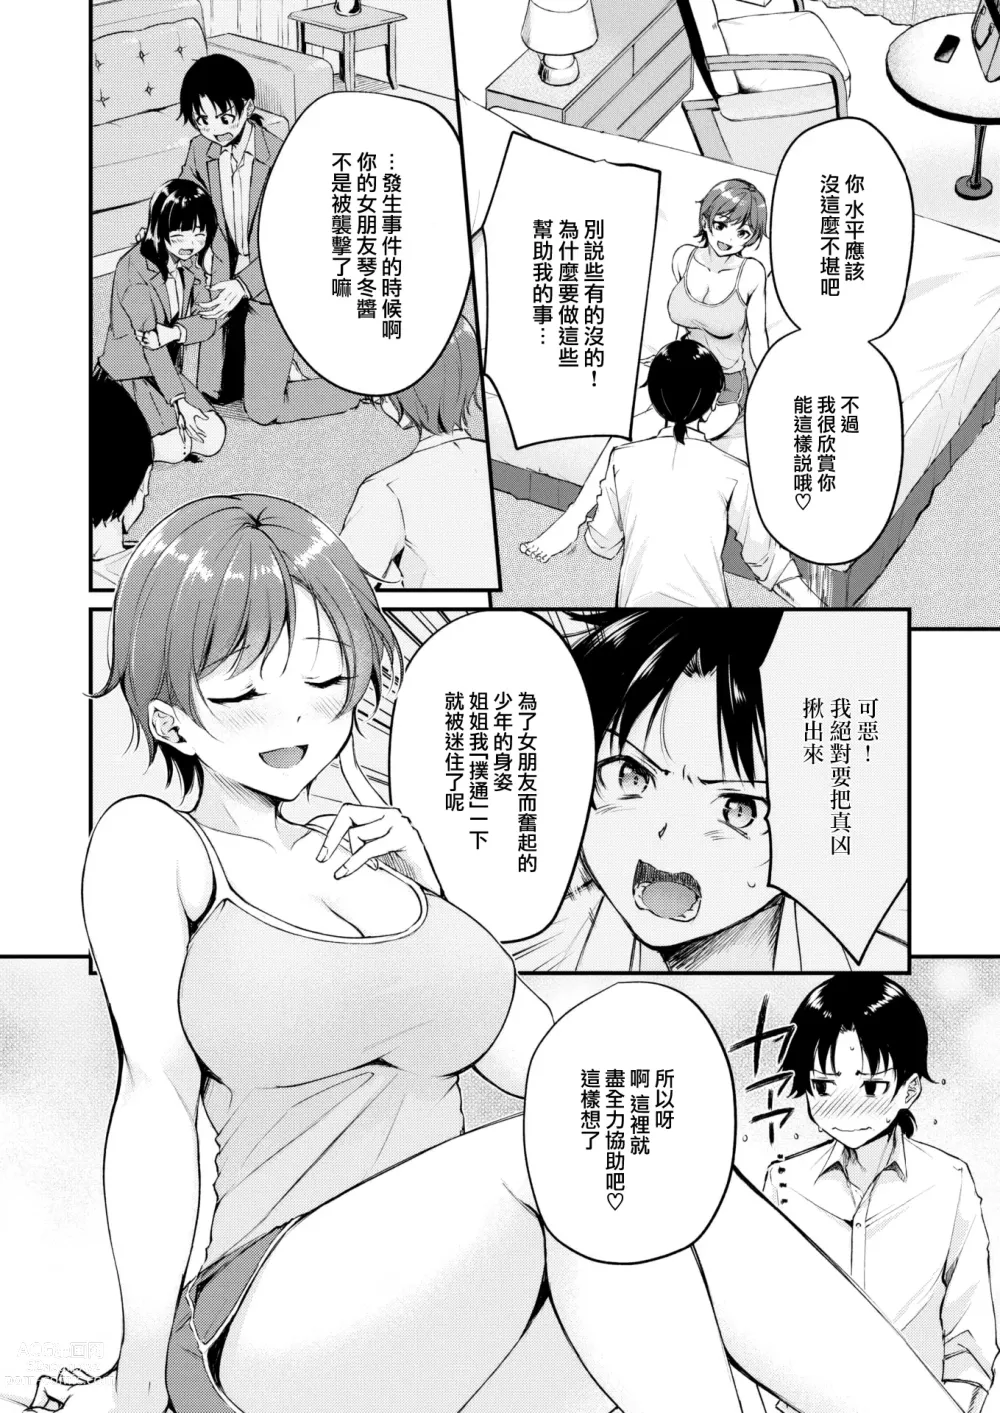 Page 7 of doujinshi えっちは謎解きのあとで